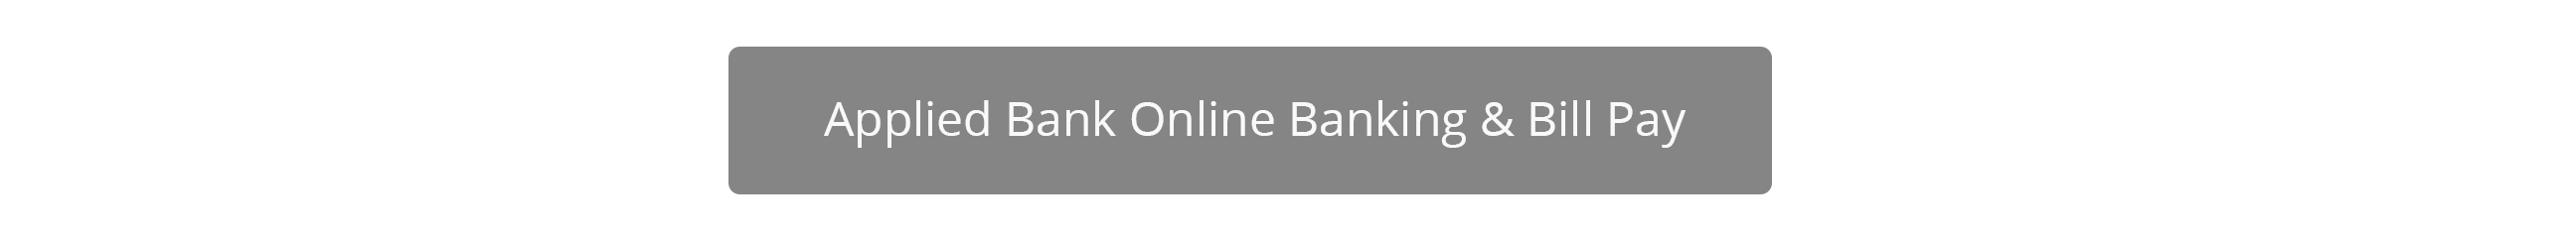 Applied Bank Online Banking & Bill Pay